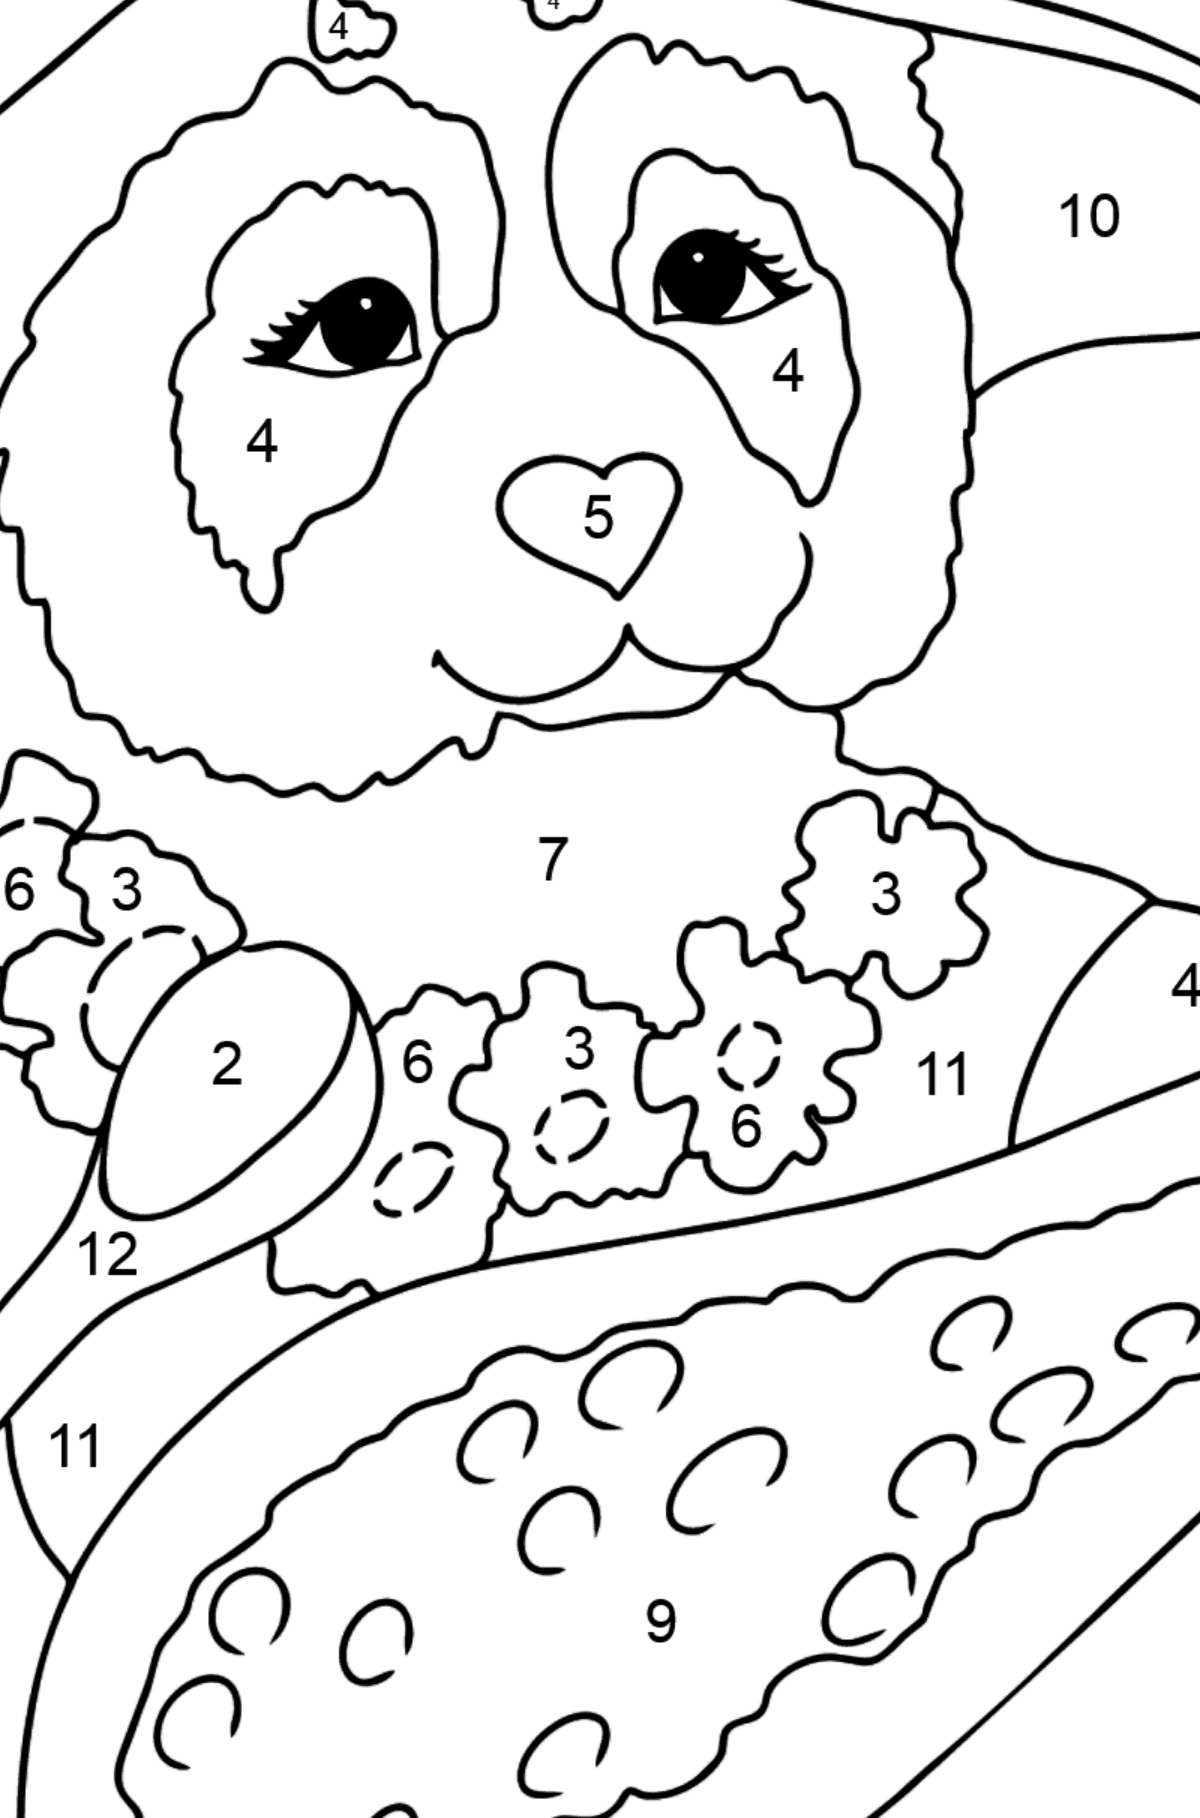 Coloring Page - A Panda is Eating - Coloring by Numbers for Kids